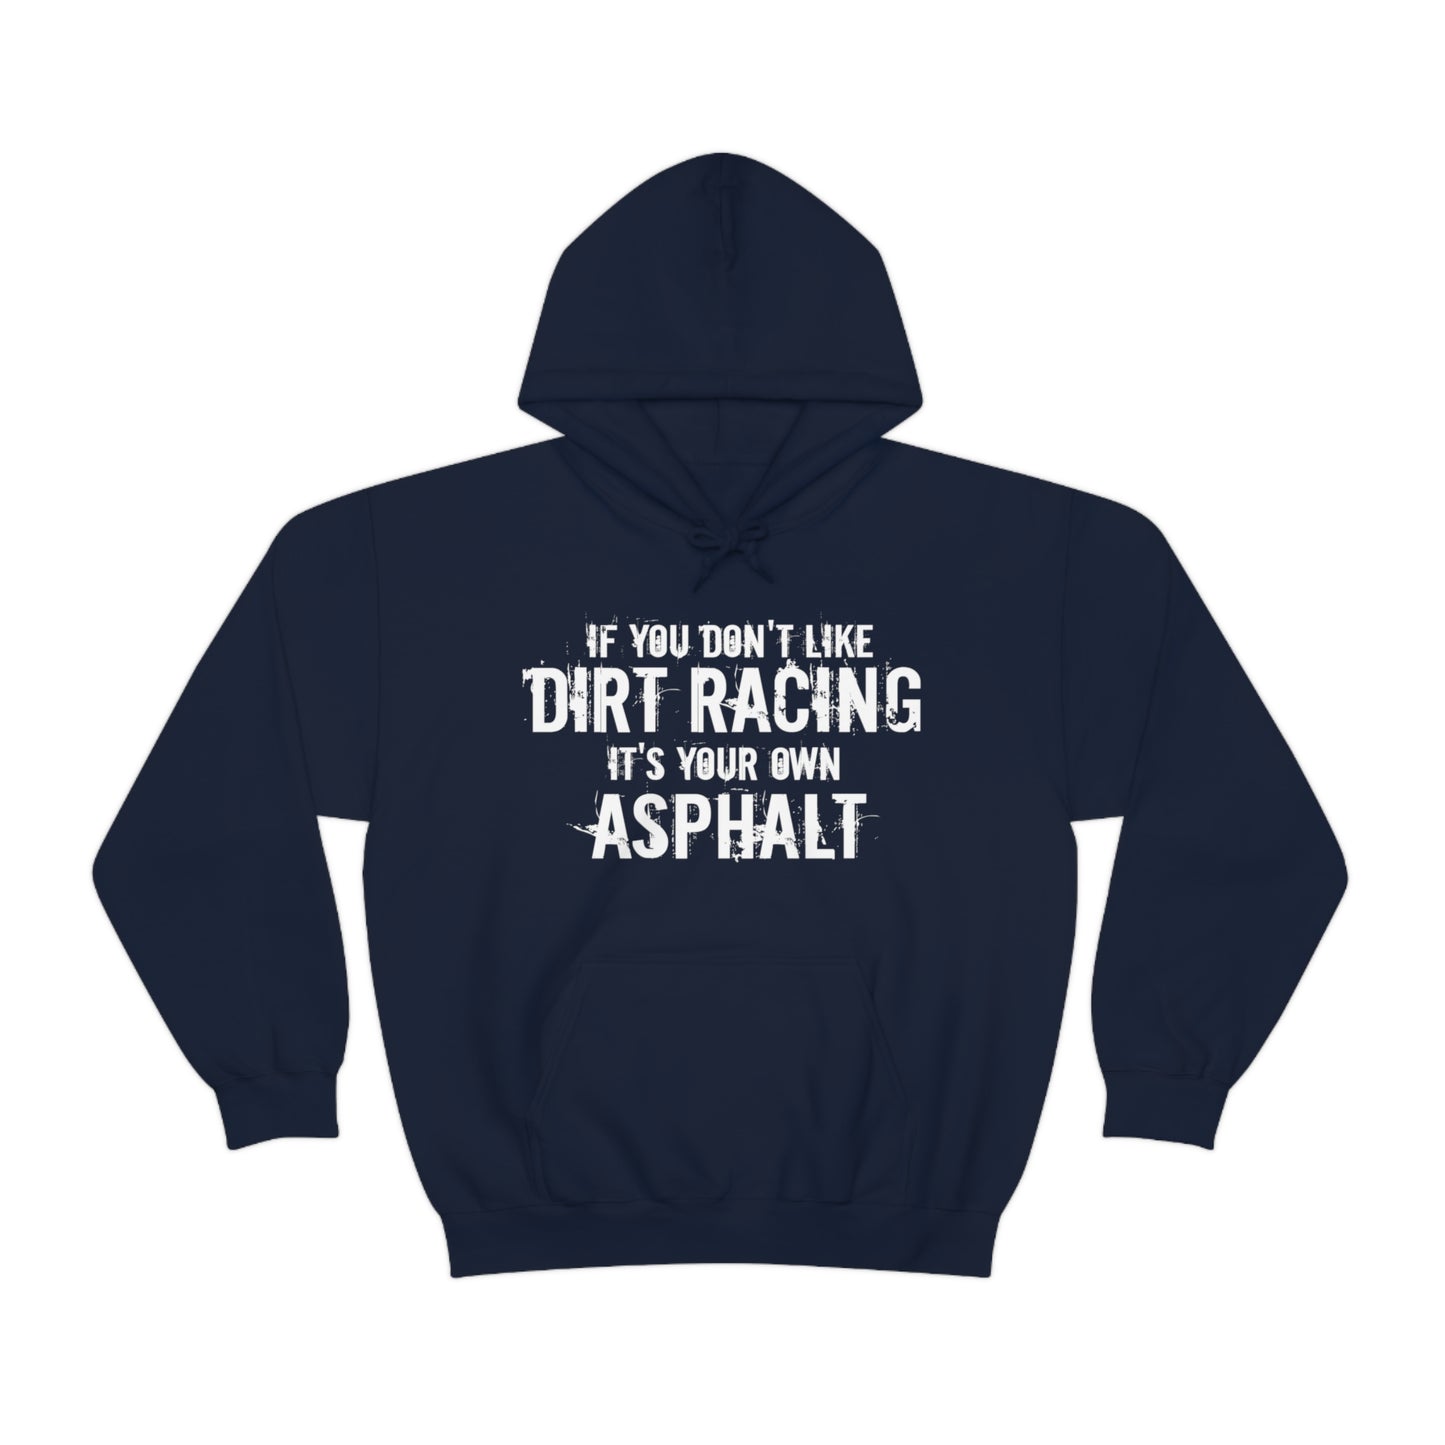 If You Don't Like Dirt Racing It's Your Own Asphalt Hooded Sweatshirt